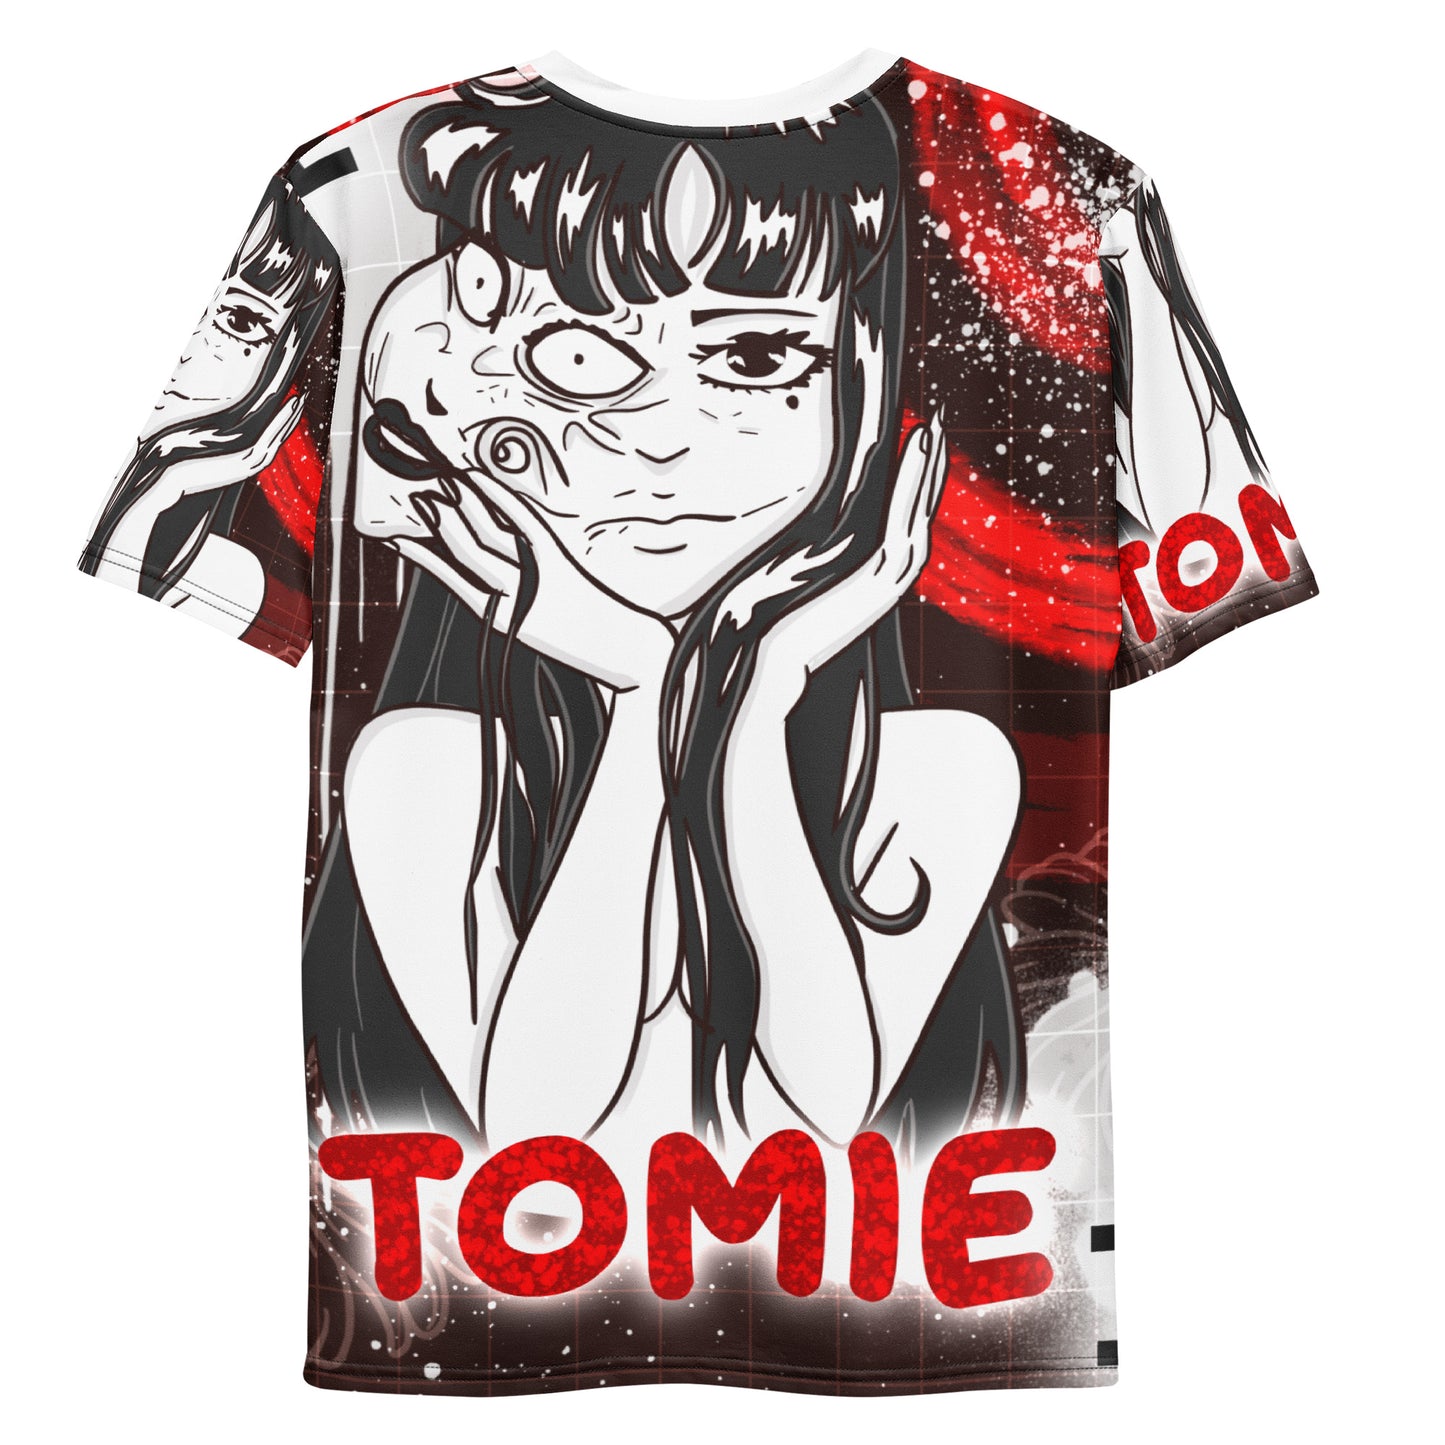 Tomie t-shirt